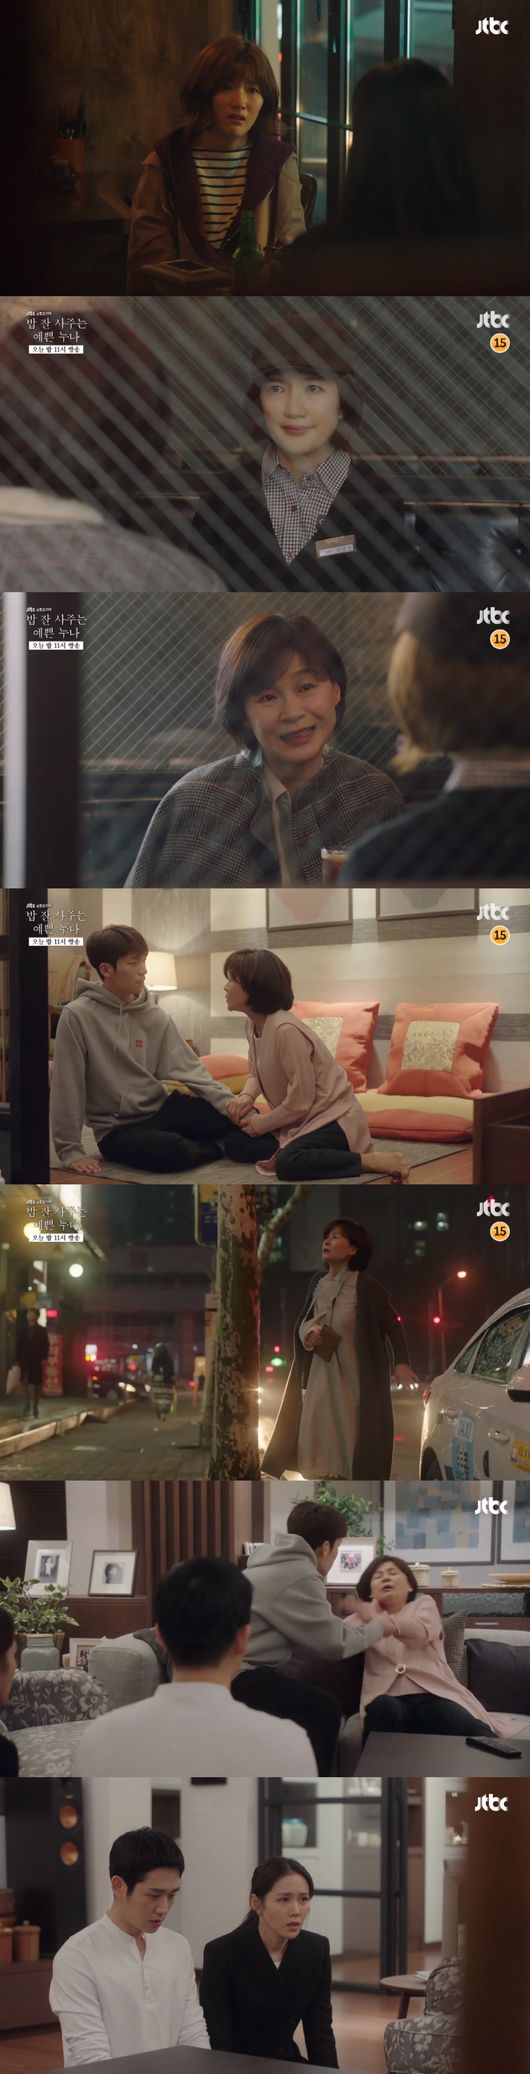 So-yeon Jang of Bob-savvy Sister acknowledged the relationship between his best friend Son Ye-jin and his brother Jung Hae In.Son Ye-jin and Jung Hae In have to persuade and understand the people around them, but So-yeon Jang also has to deal with So-yeon Jang. JTBCs Drama Drama, Beautiful Sister Who Buys Bob Good (played by Kim Eun, director Ahn Pan-seok) was broadcast on the 27th, and Jin-ah and Jun-hee (Son Ye-jin) Jung Hae In confessed to the Primary Election (So-yeon Jang) that he was a lover. On this day, the Primary Election was confused, such as knowing the relationship between Jin-ah and Jun-hee, feeling betrayed and worried.He also said that Primary selection was a family-like friend with Jin-ah and the world, and he was like a family with Jin-ahs parents.Because of this, the betrayal of the primary election was great, and I avoided the two people and eventually met and talked to Jina. I do not know what kind of spirit I sent a few days to Jina.That was a shock, and I was so shaken by betrayal.I did not know anyone else, but how you are. But when I saw Jin-ah, who was suffering, I finally understood the relationship between Jin-ah and Jun-hee. Primary selection spent a few days knowing the relationship between Jin-ah and Jun-hee.Because Jin-ahs mother Mi-yeon (Hae-yoen Gil) is a character that is not easy.It will be difficult for Jina and Junhee to persuade Mi-yeon, but there is a pain that Junhee should bear with the primary selection, which is like mother. Mi-yeon is only an important person.Mi-yeon tried to marriage Jin-ah with a spec-good man somehow and liked Jin-ahs ex-boyfriend Kyu-min (Oh-ryung), a lawyer, quite a bit.Mi-yeon was trying to promote the marriage of Jin-a and Kyu-min somehow because he had a good job and could afford to go to the house. What was more shocking was that Mi-yeon knew that Kyu-min was a double leg, but he also told him to close his eyes to Jin-a because of the specs of Kyu-min.In addition, his son Yang Seung-ho, a doctoral student, is a signboard of the family, and he cares about Yang Seung-ho. He also tells the two people that Junhee and the father of Primary selection have complicated womens relations.